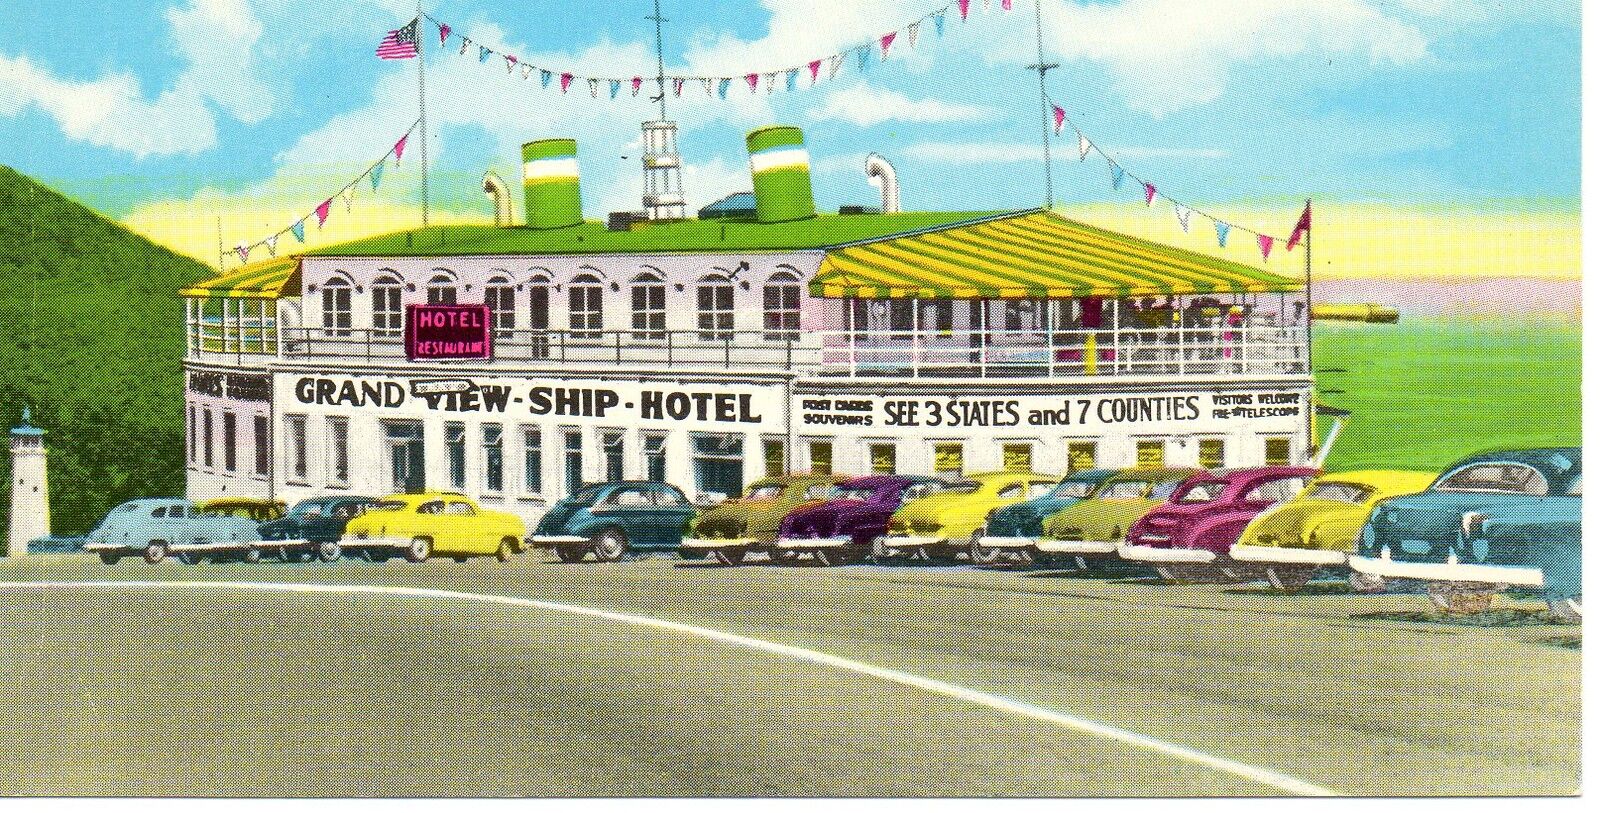 GRAND VIEW POINT SHIP HOTEL,ON U.S. RT. 30-BEDFORD,PA 1957